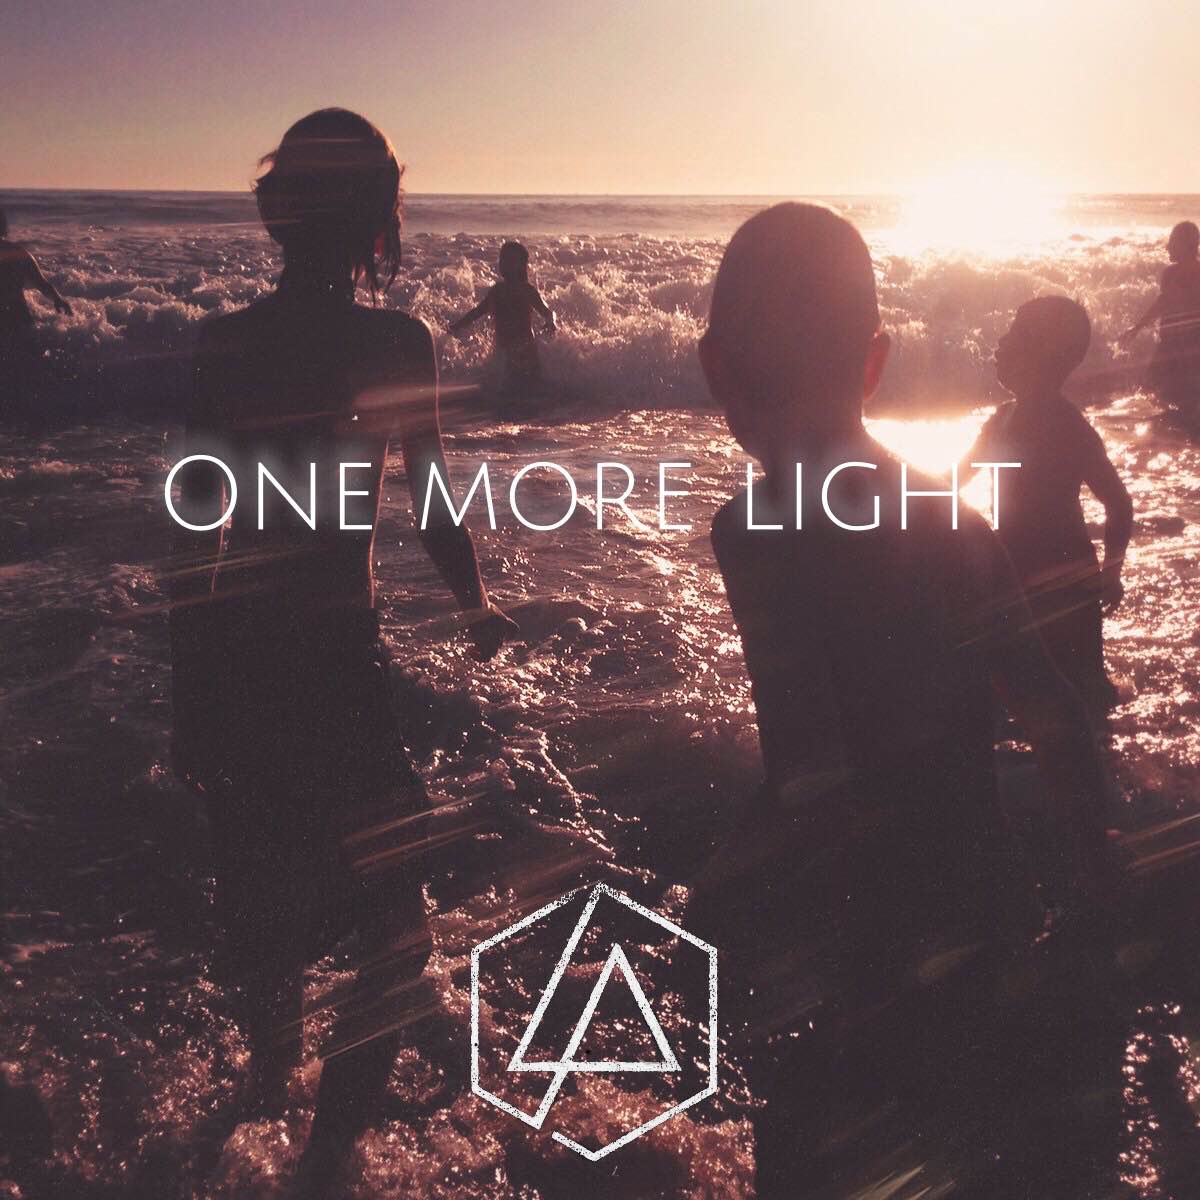 Linkin Park – One More Light Review